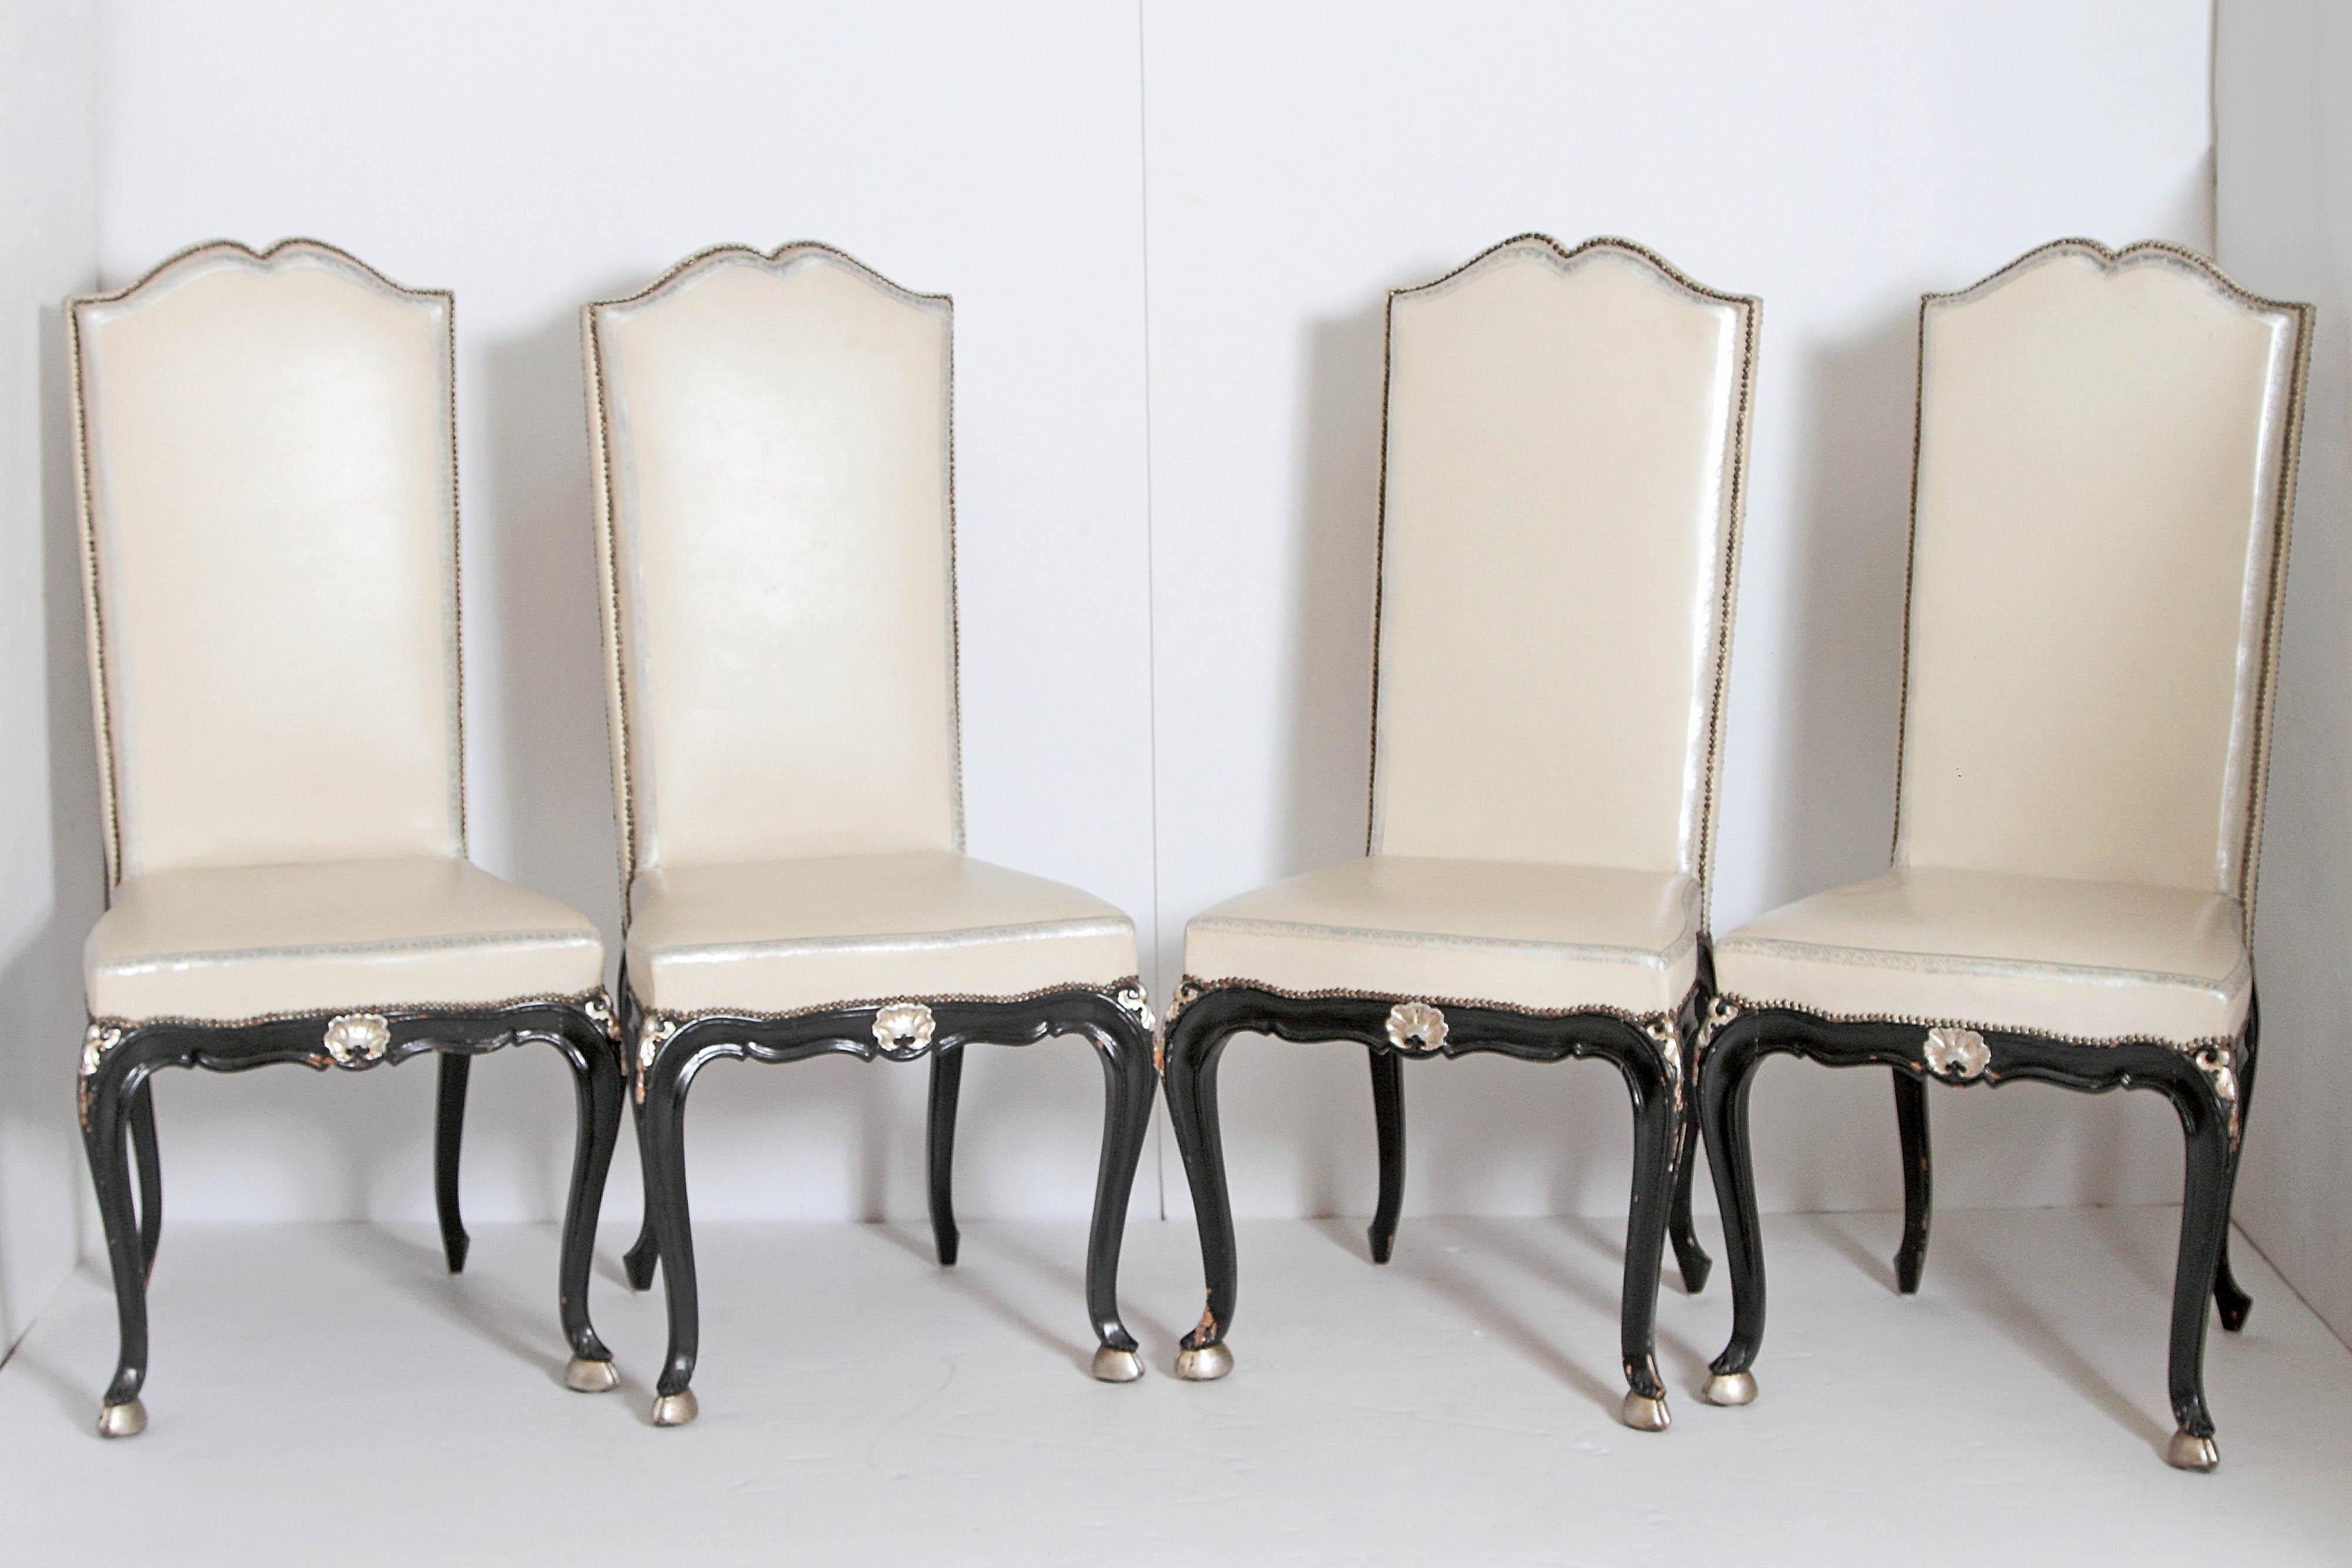 A set of twelve high back dining side chairs Louis XV style with ebonized wood frames with gilt bronze mounts at knees and gilt shell centre front. Gilt hoof feet. Cream leather upholstery with nail-heads.